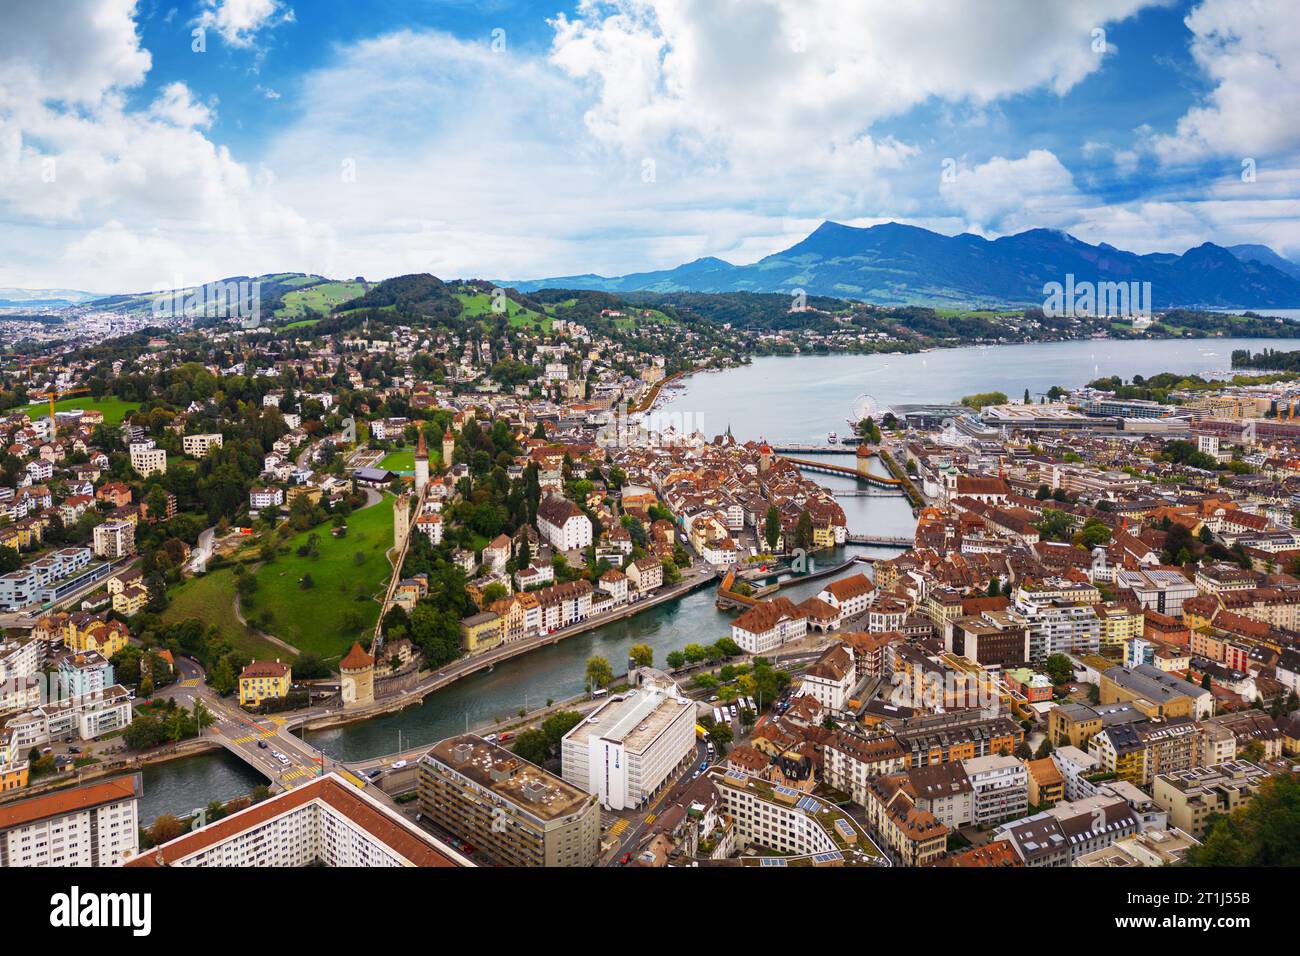 Lucern, Switzerland aerial view over the Ruess River. Stock Photo